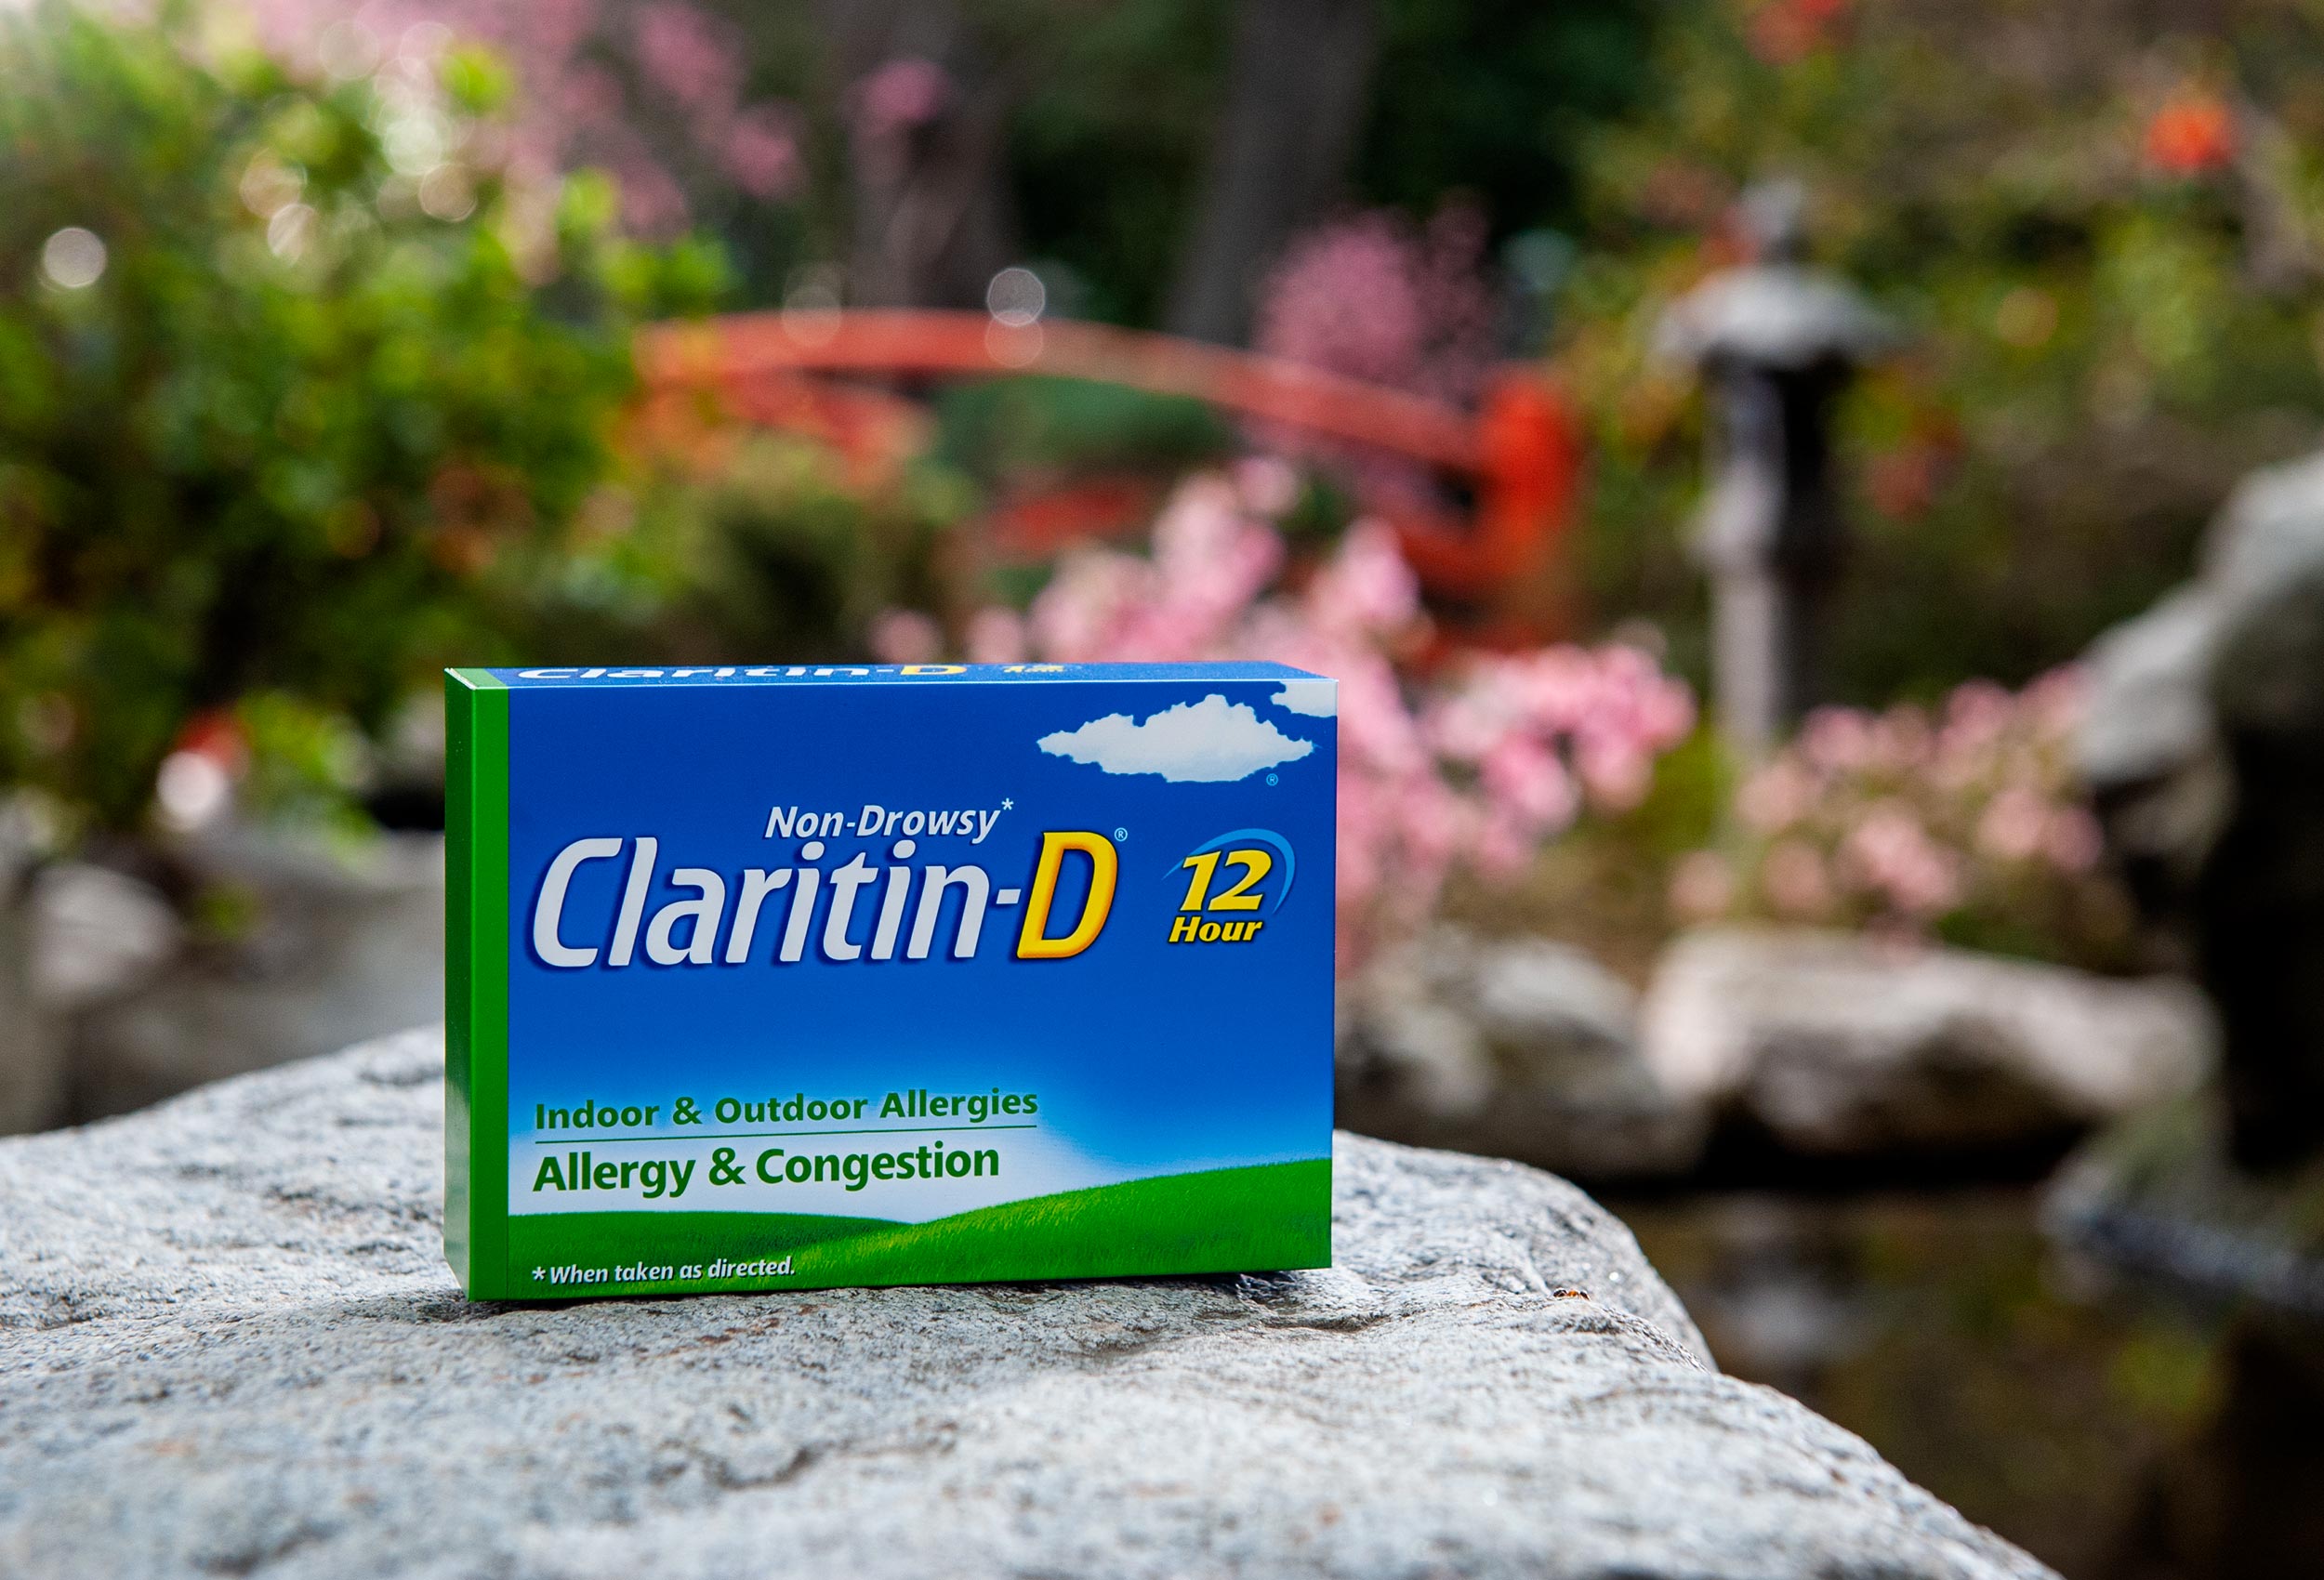 Non-drowsy Claritin D box product photography for advertising campaign